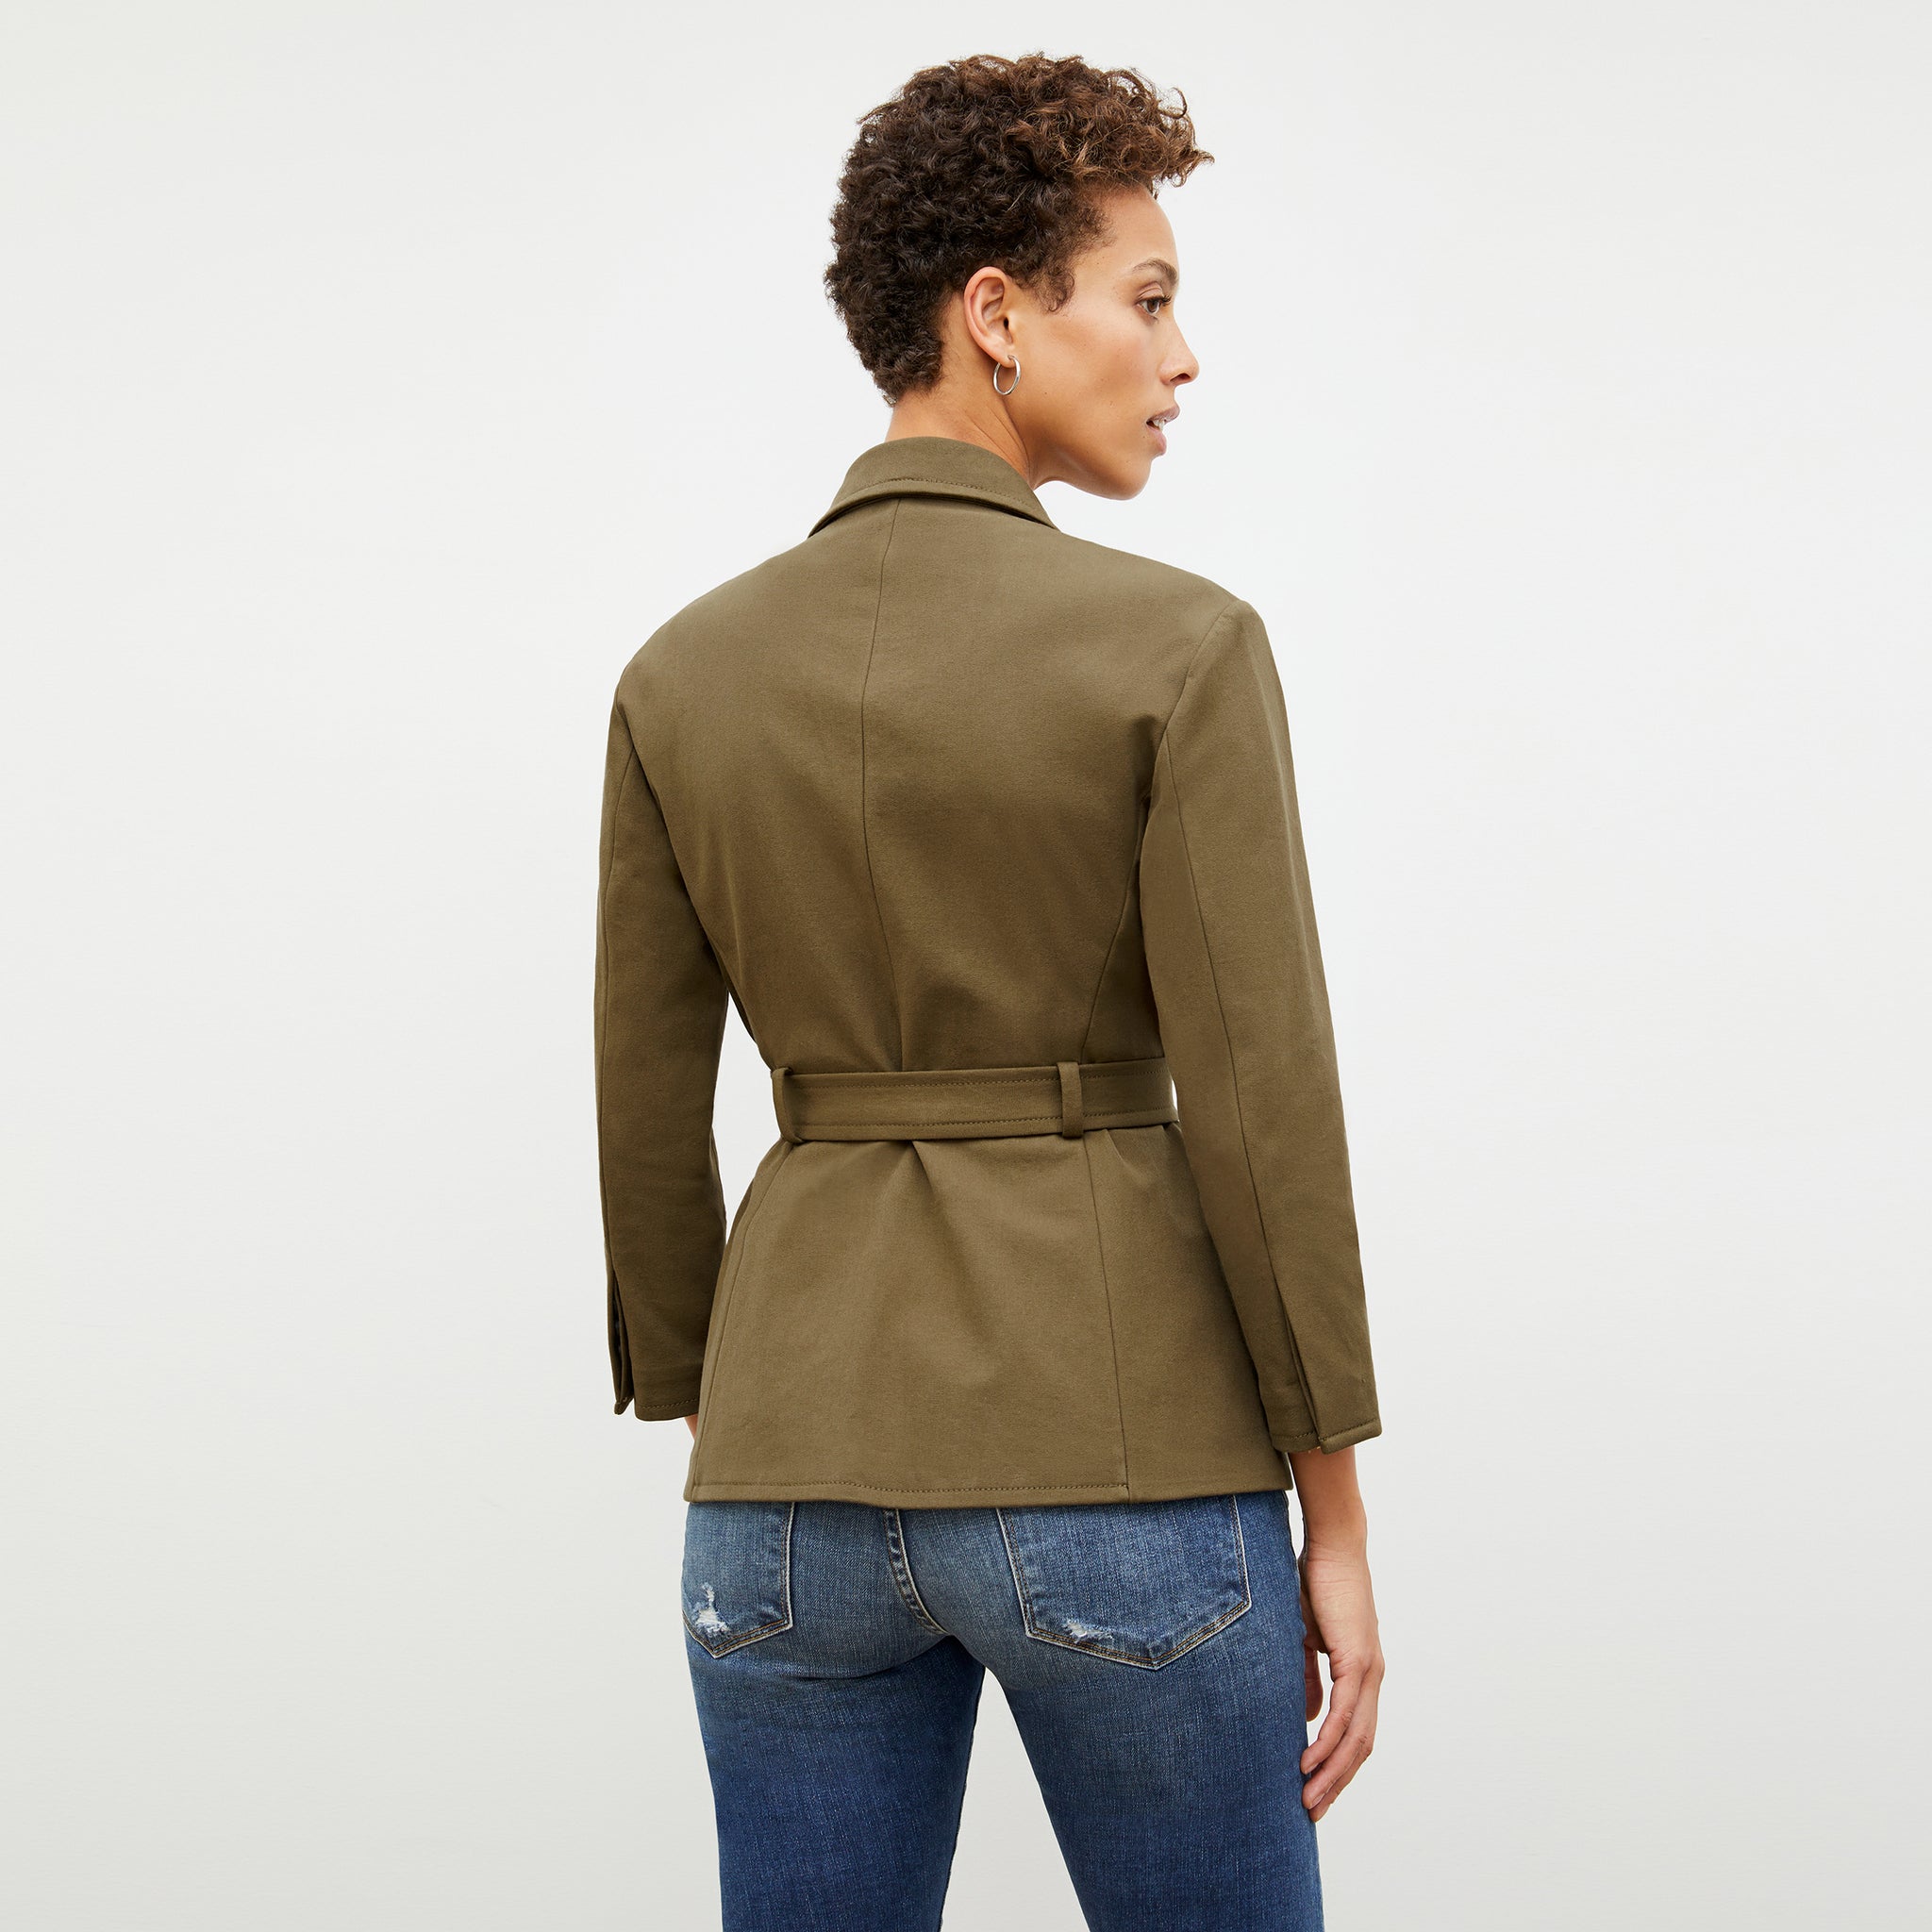 Back image of a woman in the emalis jacket in oregano